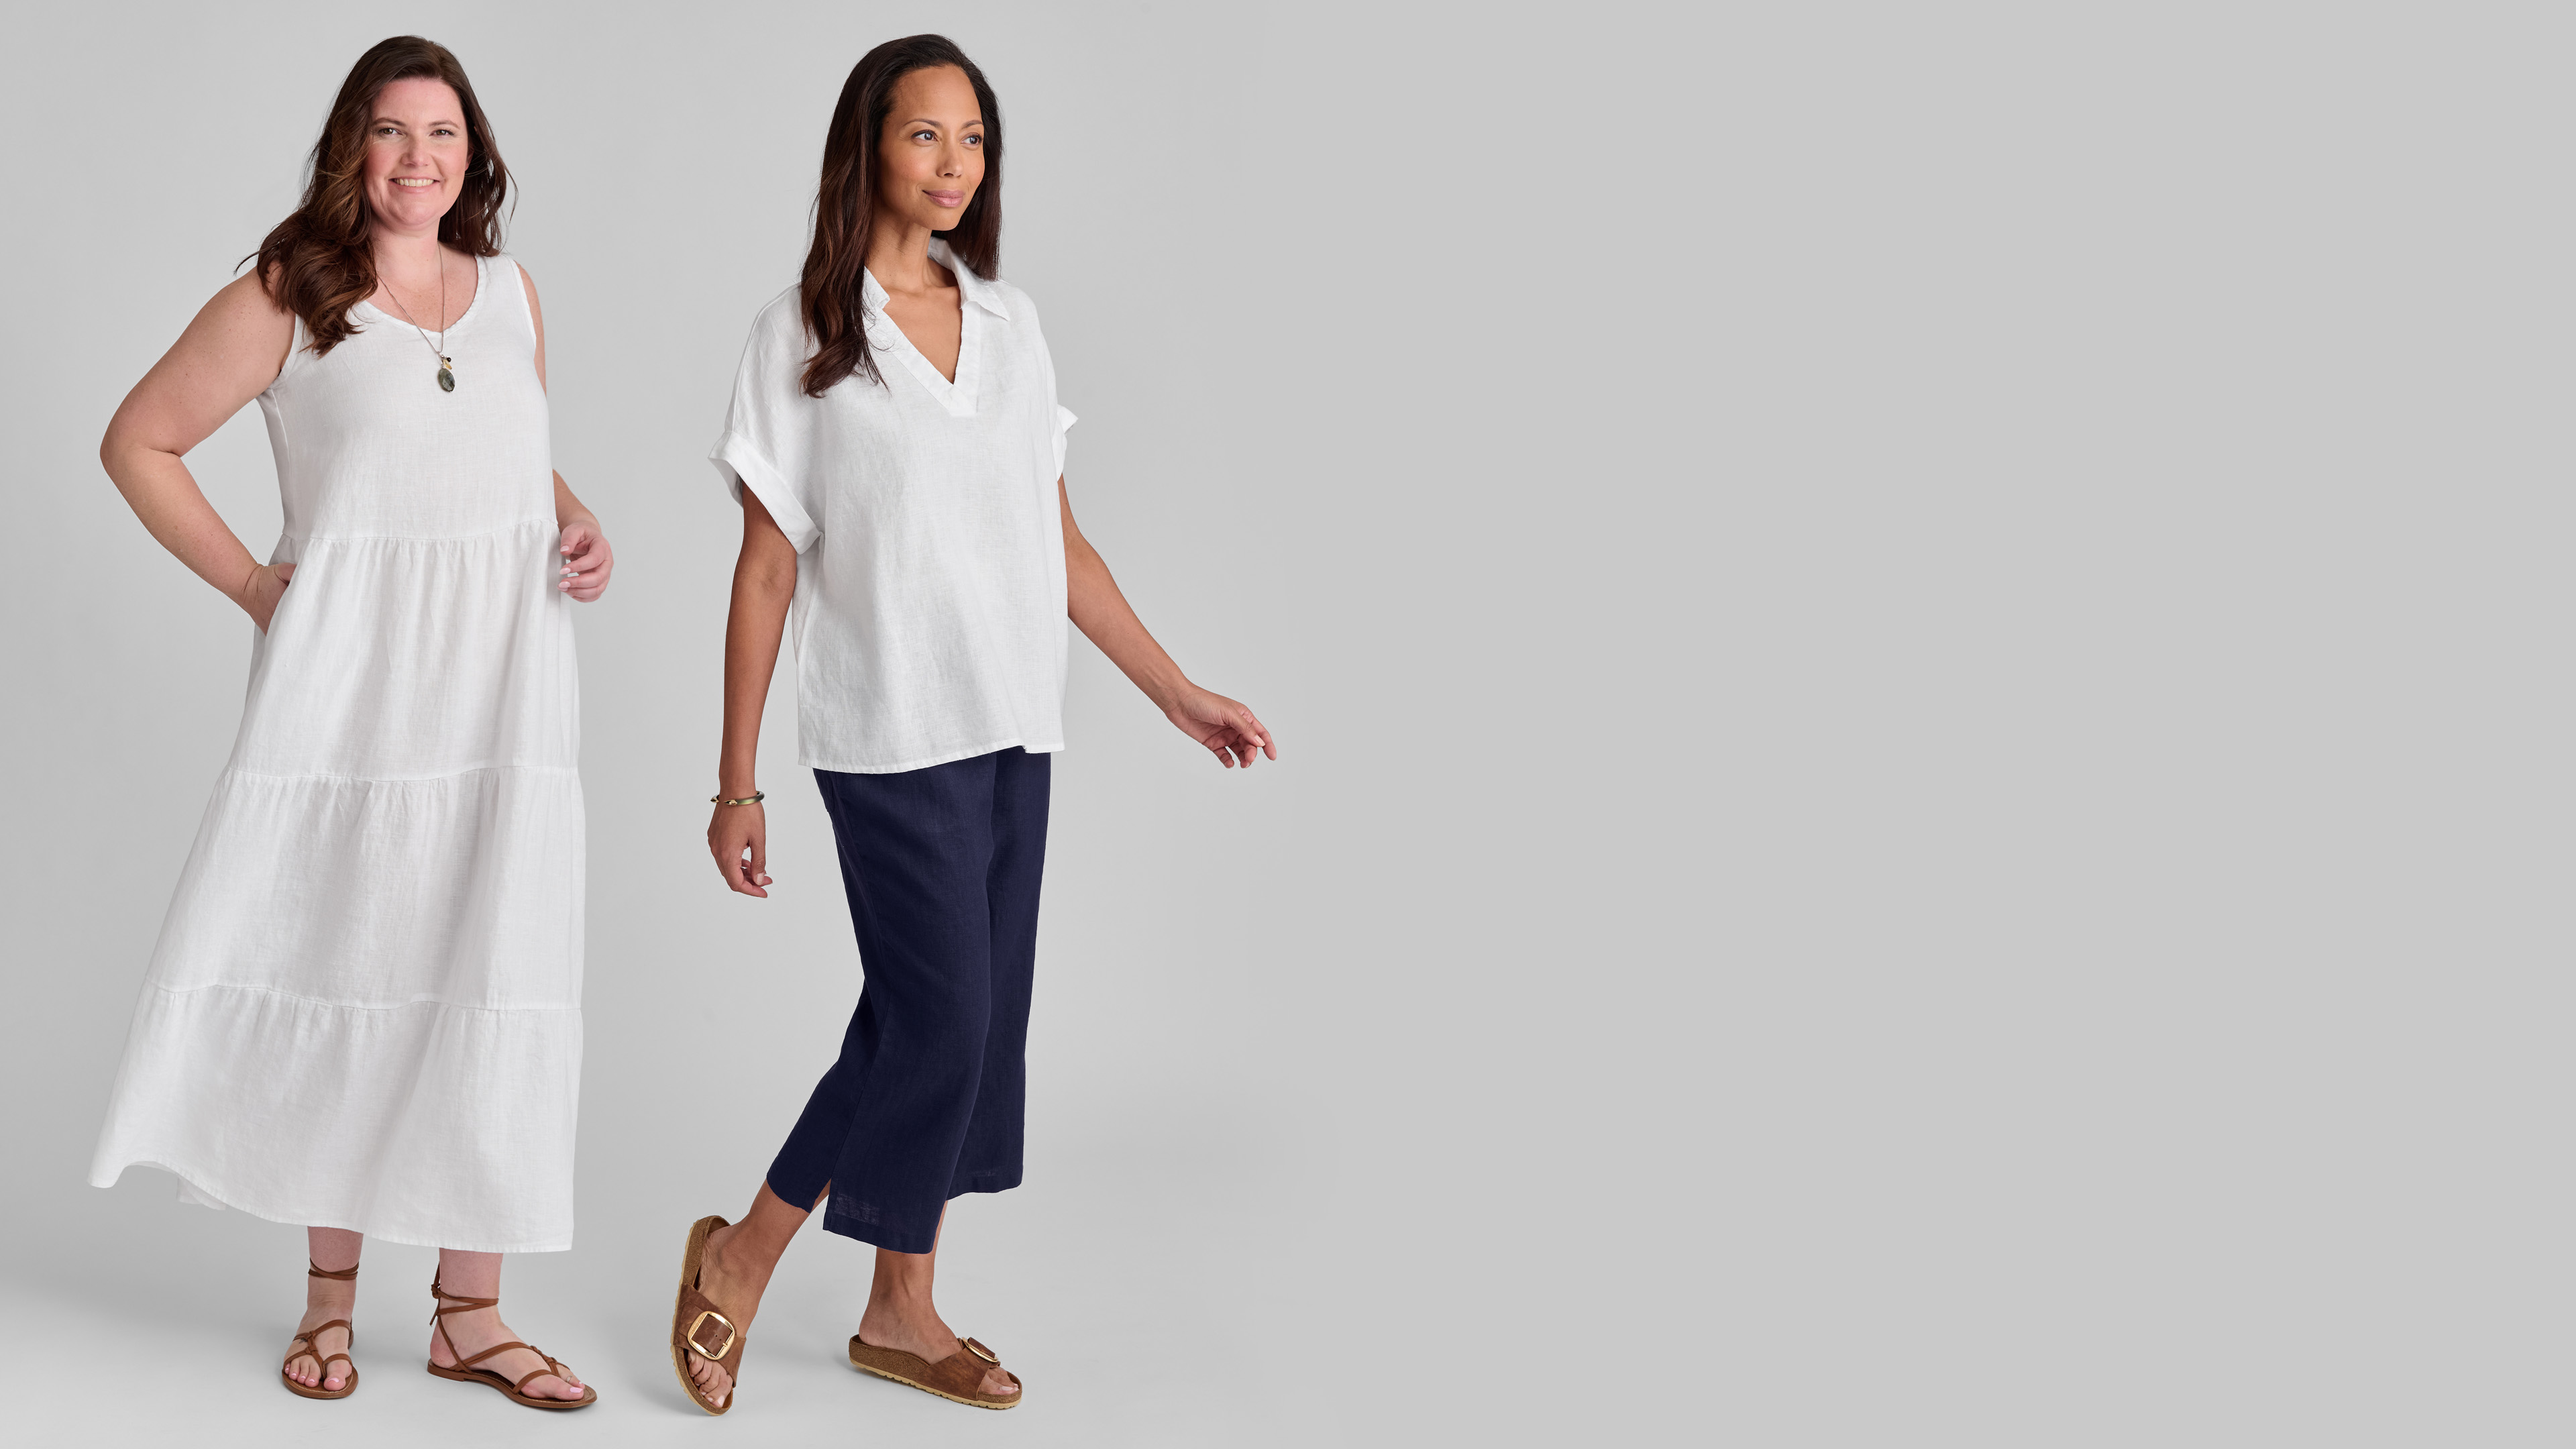 FLAX Clothing Brand - Premium Linen Clothing for Women